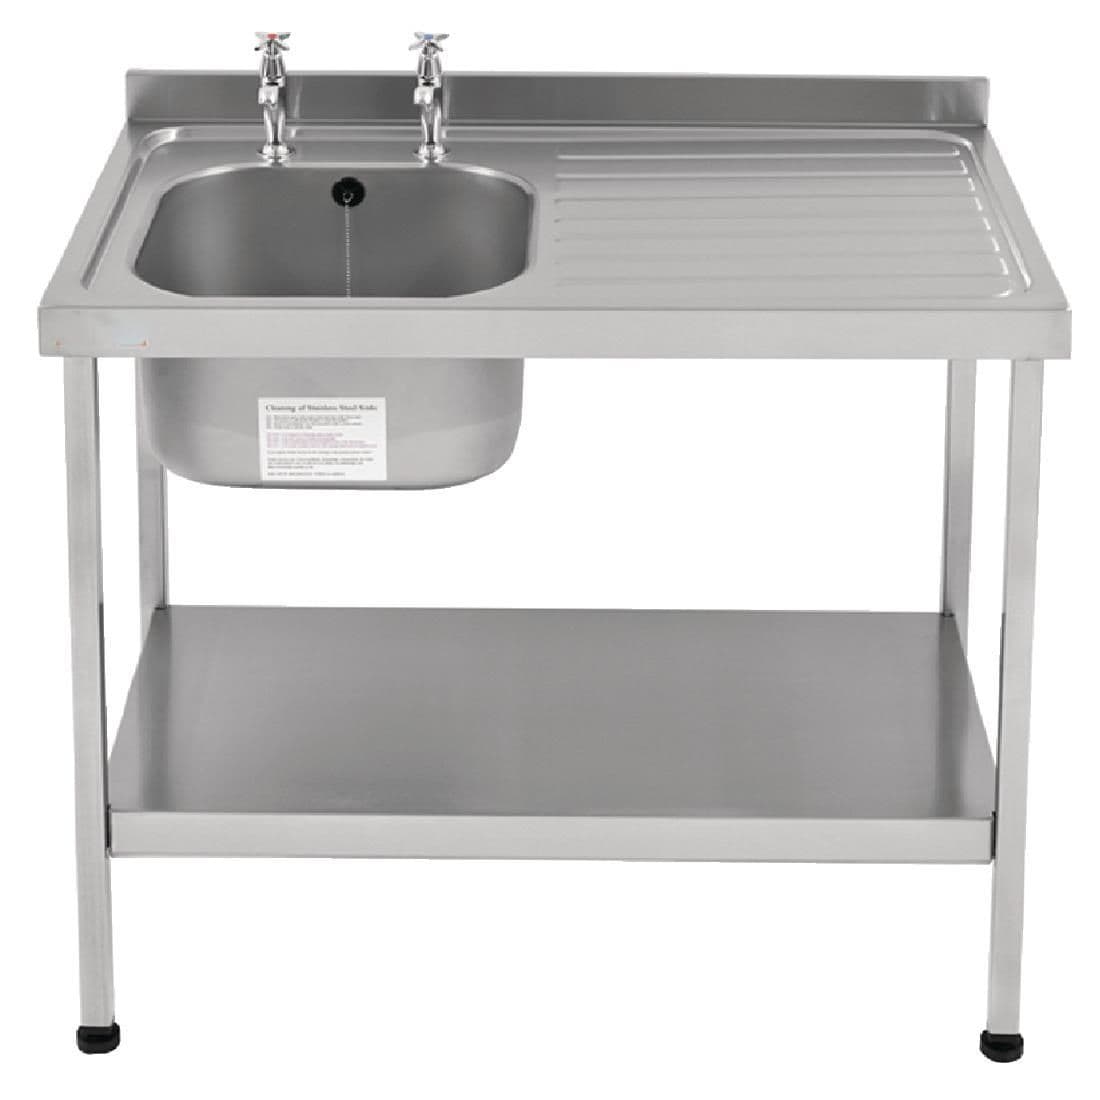 Franke Sissons Self Assembly Stainless Steel Sink Right Hand Drainer 1200x600mm JD Catering Equipment Solutions Ltd